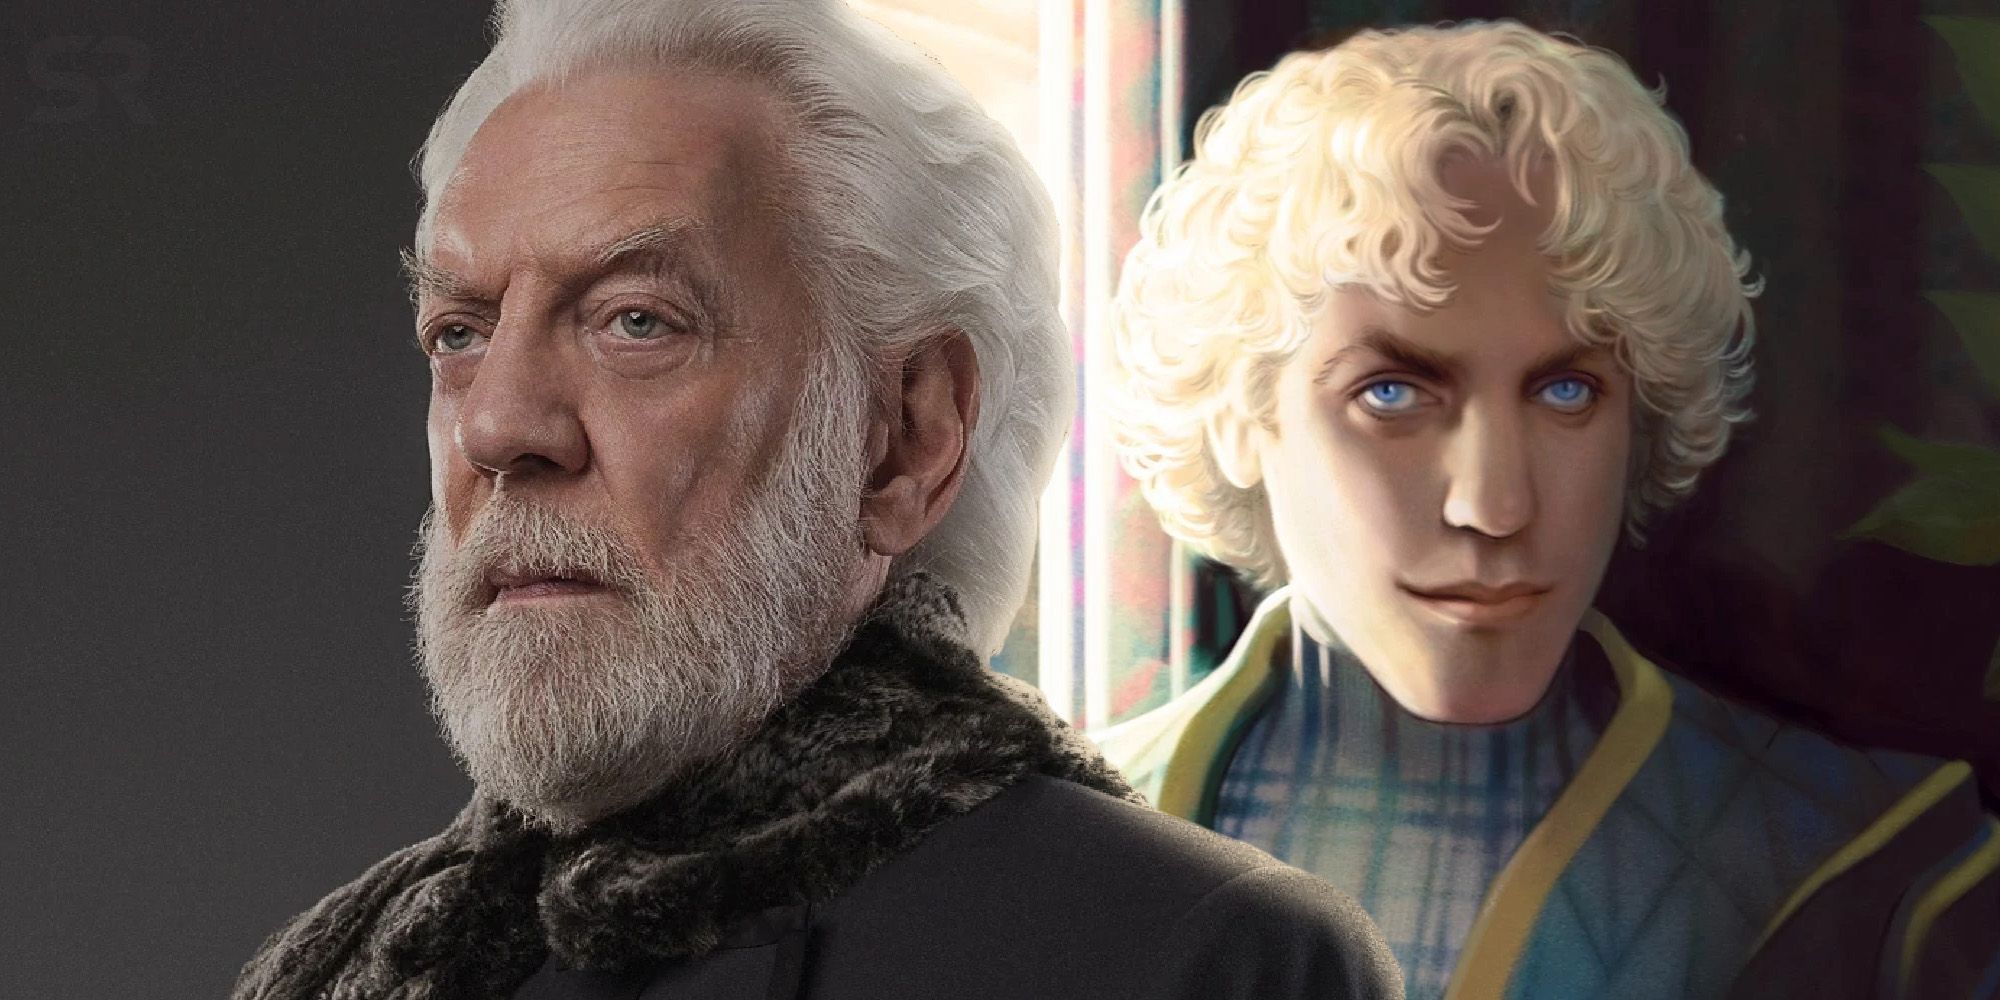 President snow age in hunger games and prequels